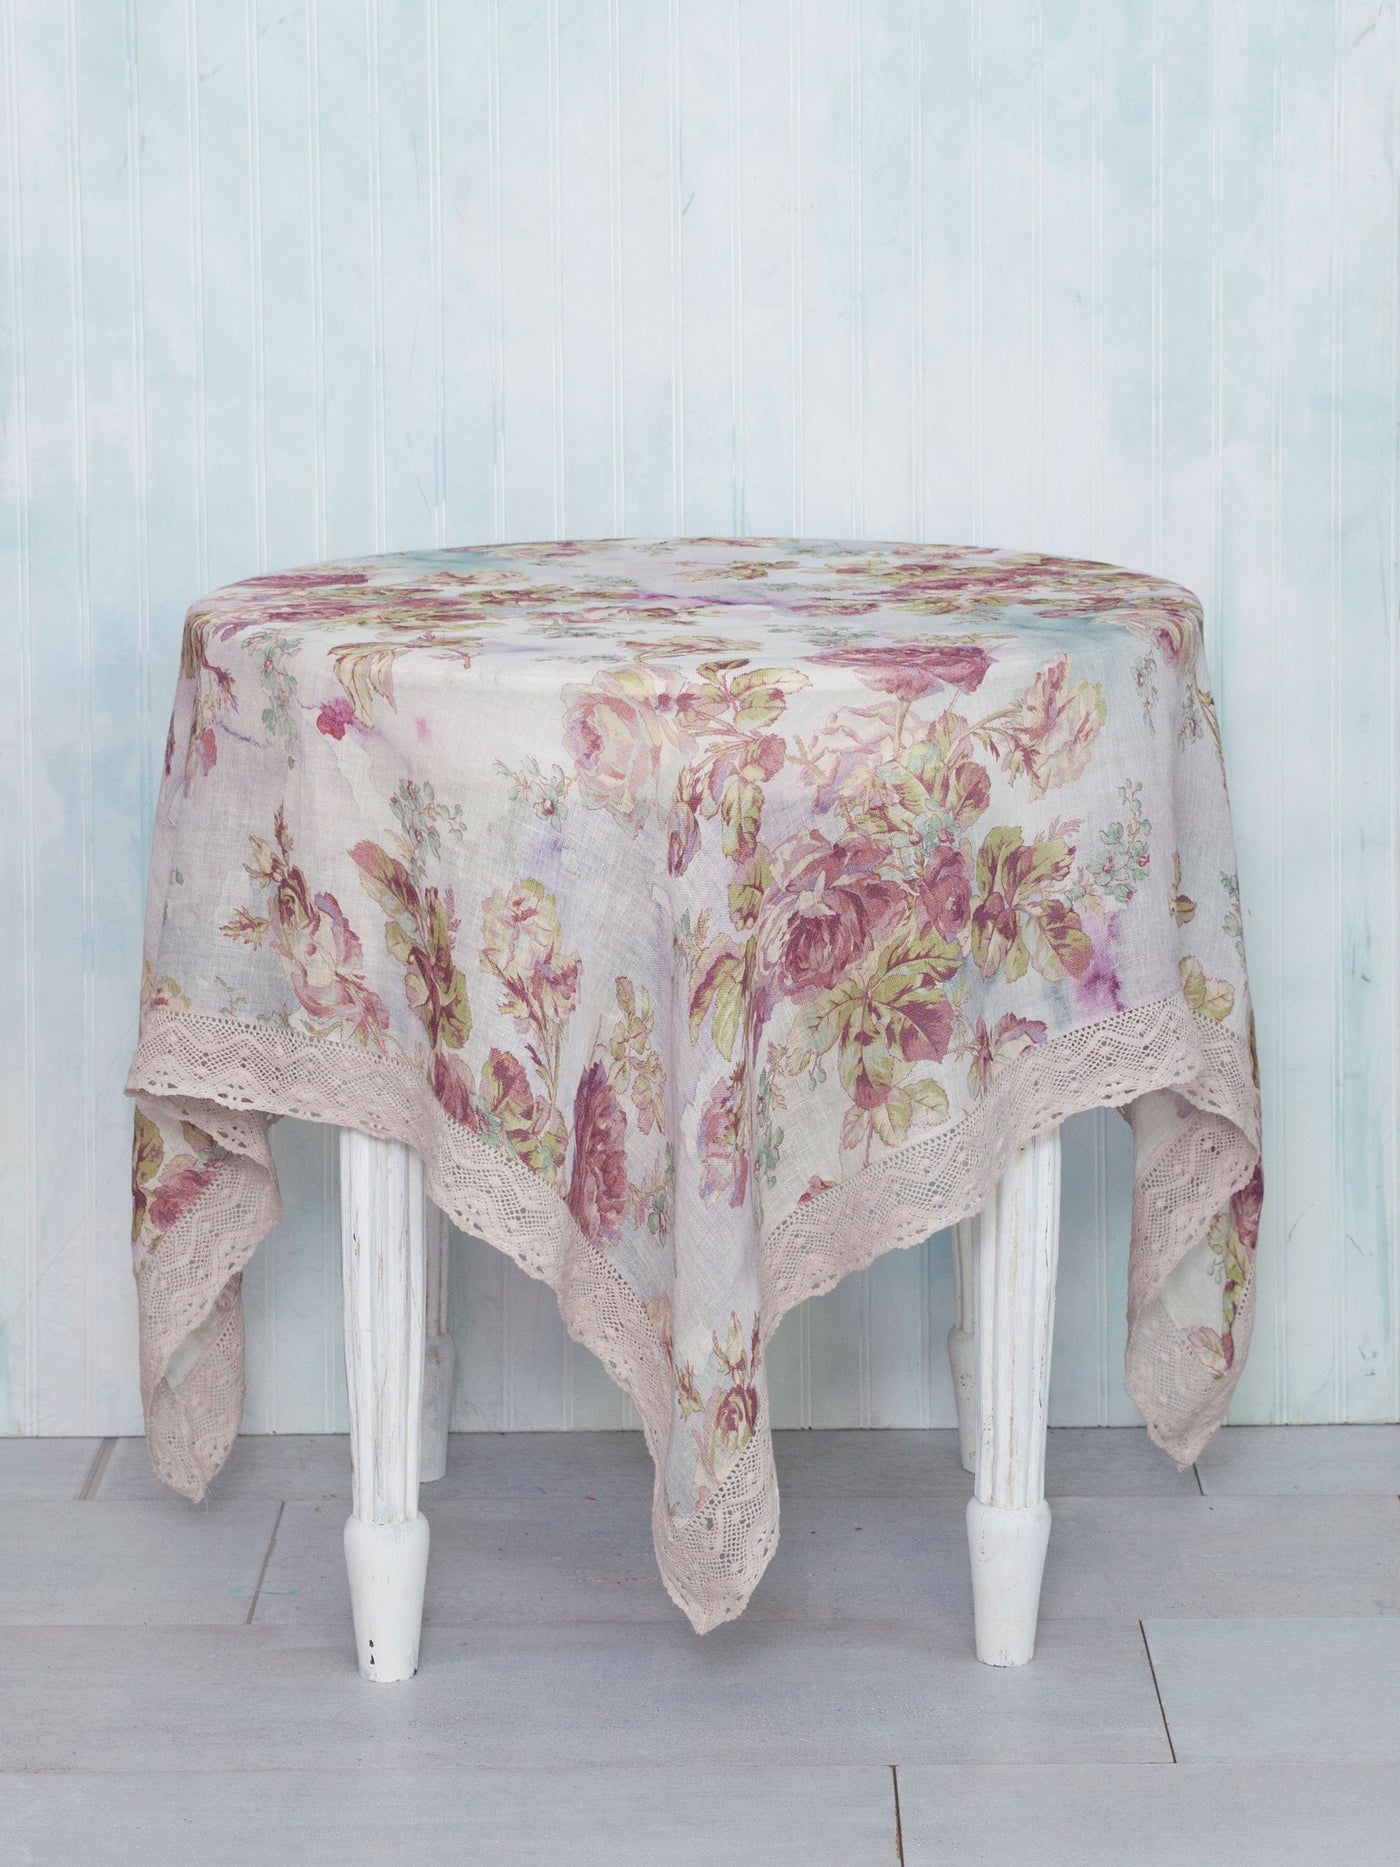 Secret Garden Tablecloth in Amethyst | April Cornell- SOLD OUT